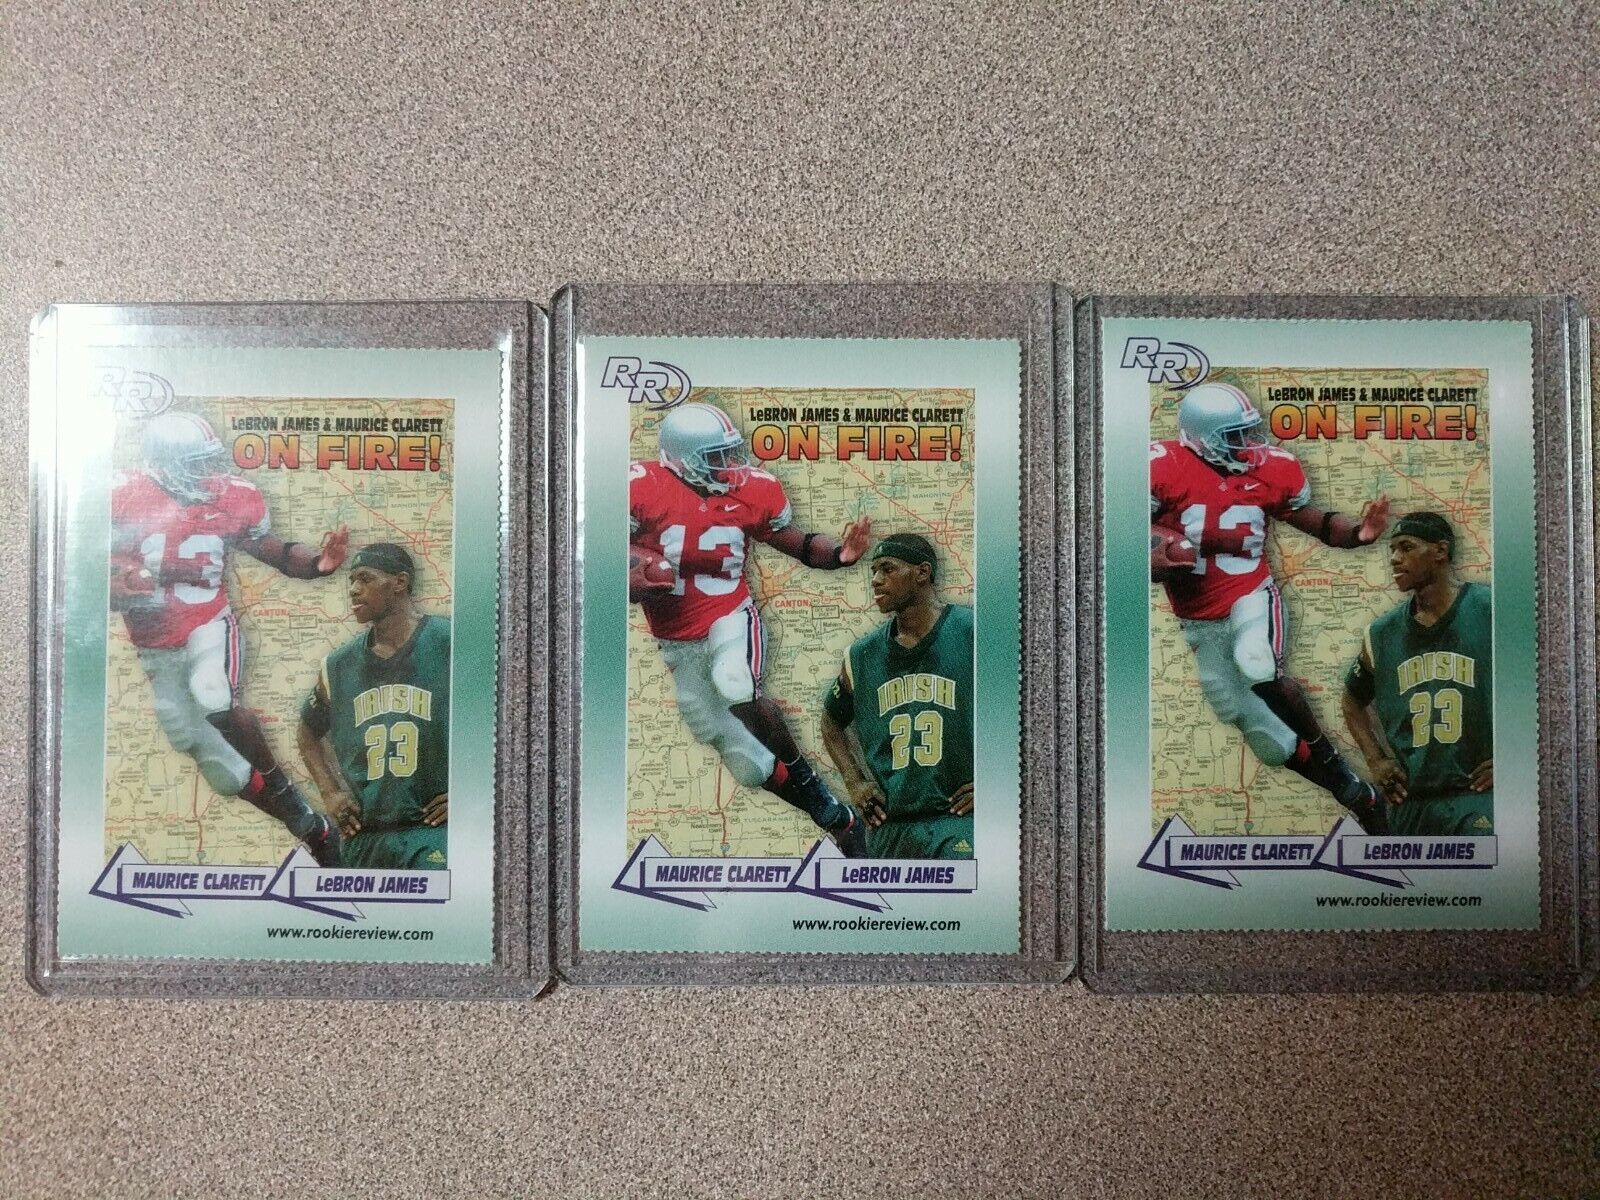 (3) Lebron James / Maurice Clarett 2002 Rookie Review On Fire Rookie Card  #36